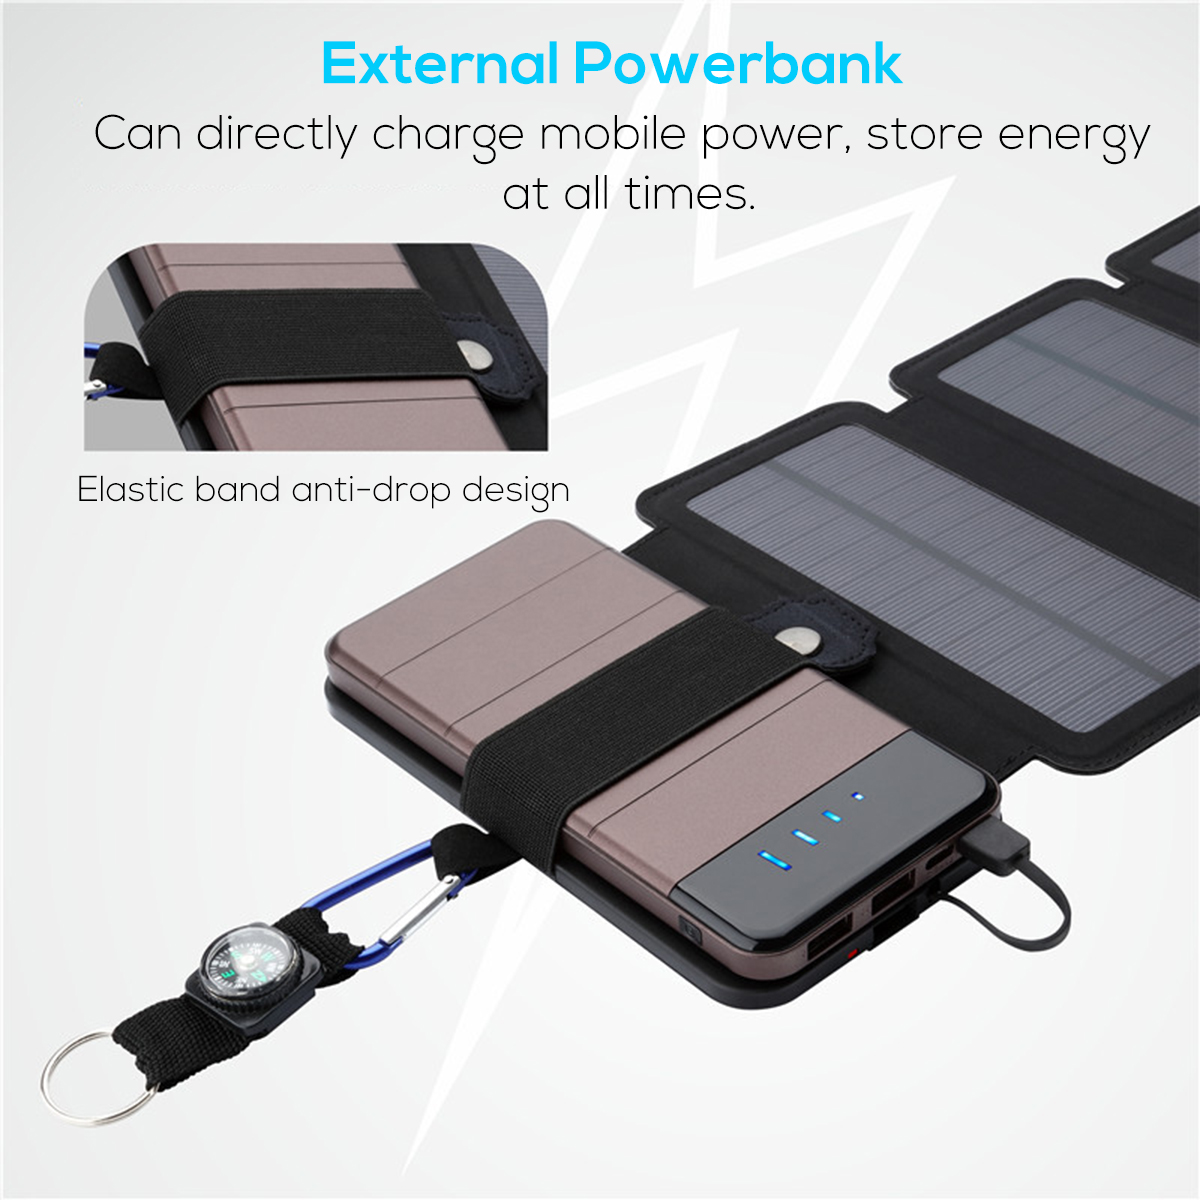 6W-Portable-Foldable-Solar-Panel-Power-Charger-For-Phone-MP3MP4PDA-Power-Bank-1430184-4